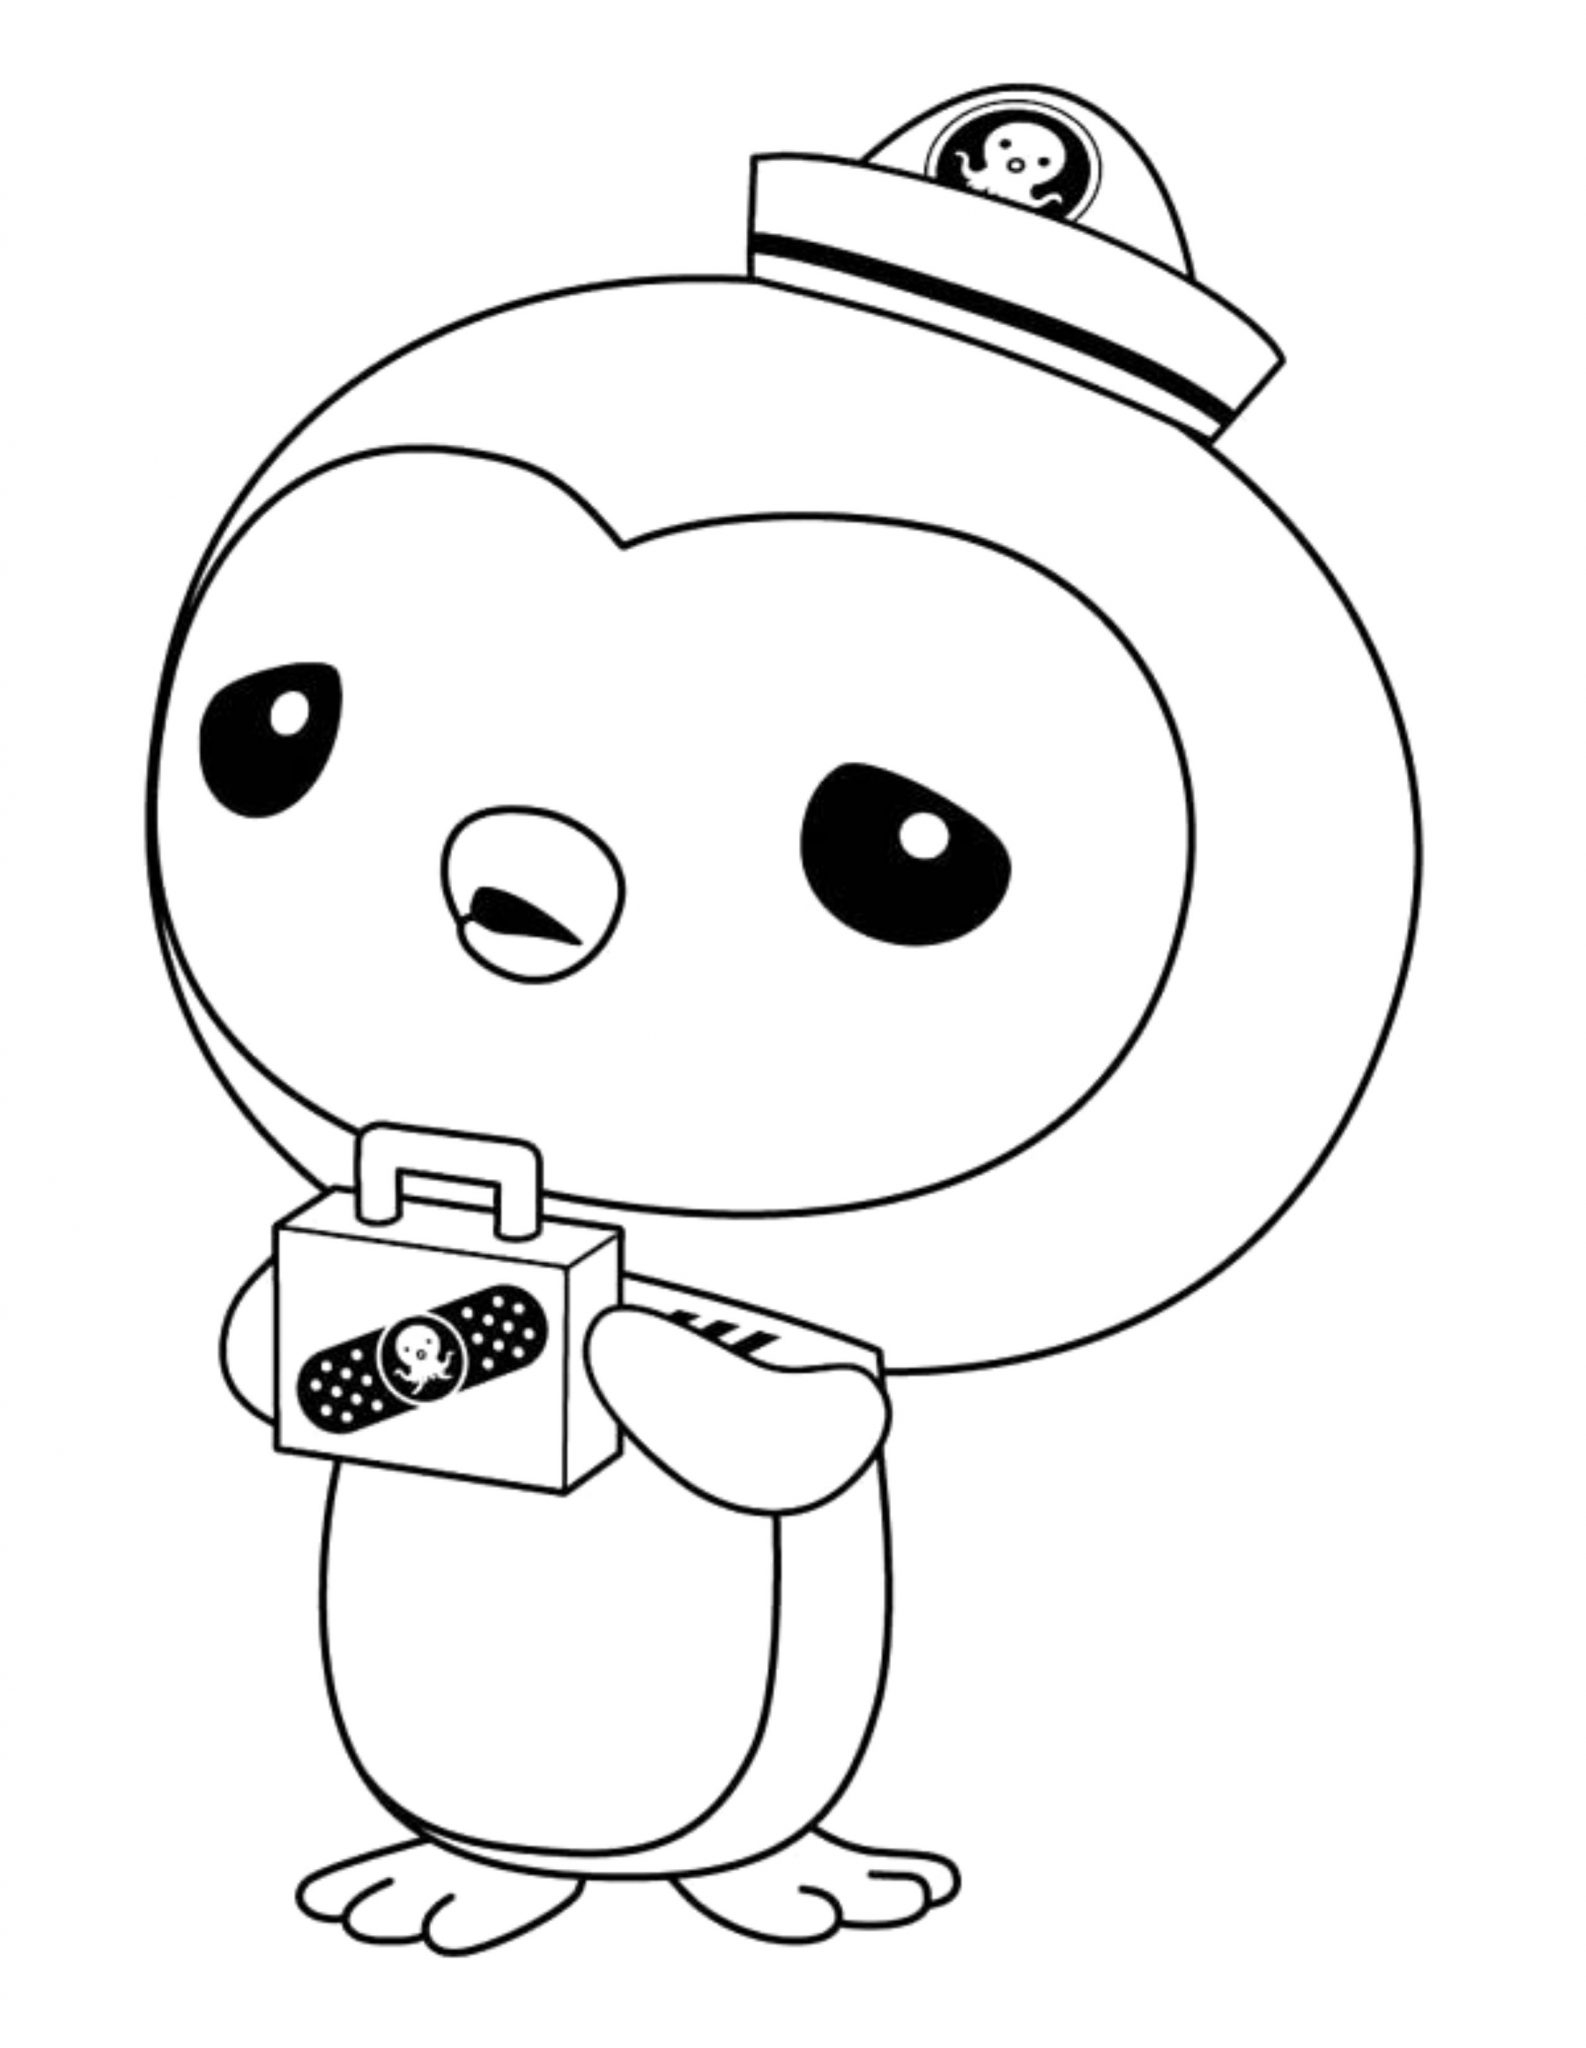 Captain Barnacles Coloring Pages Octonauts Coloring Pages For Your Kids Activity Best Apps For Kids